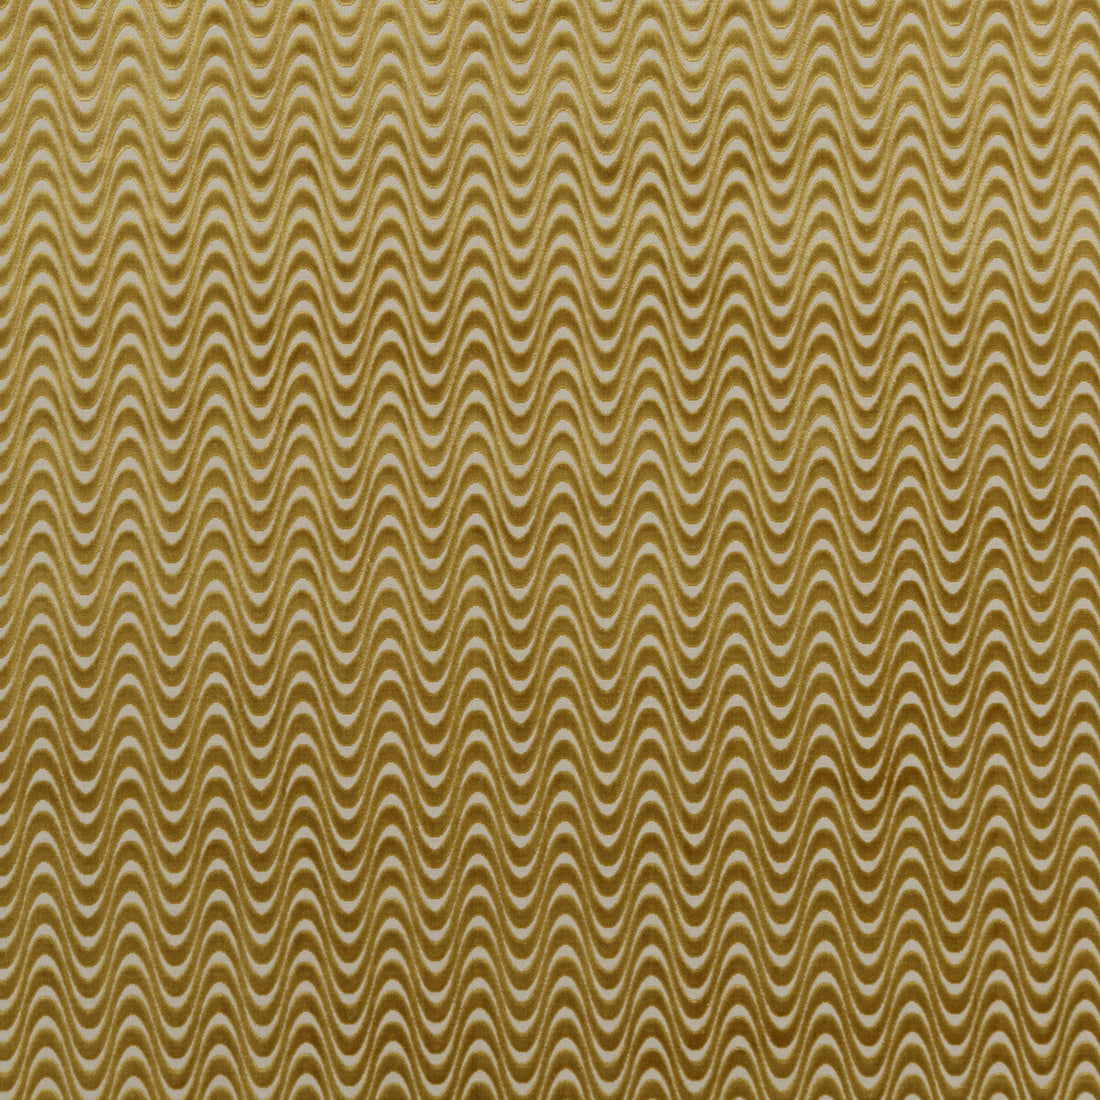 Jive fabric in ochre color - pattern PF50421.840.0 - by Baker Lifestyle in the Carnival collection